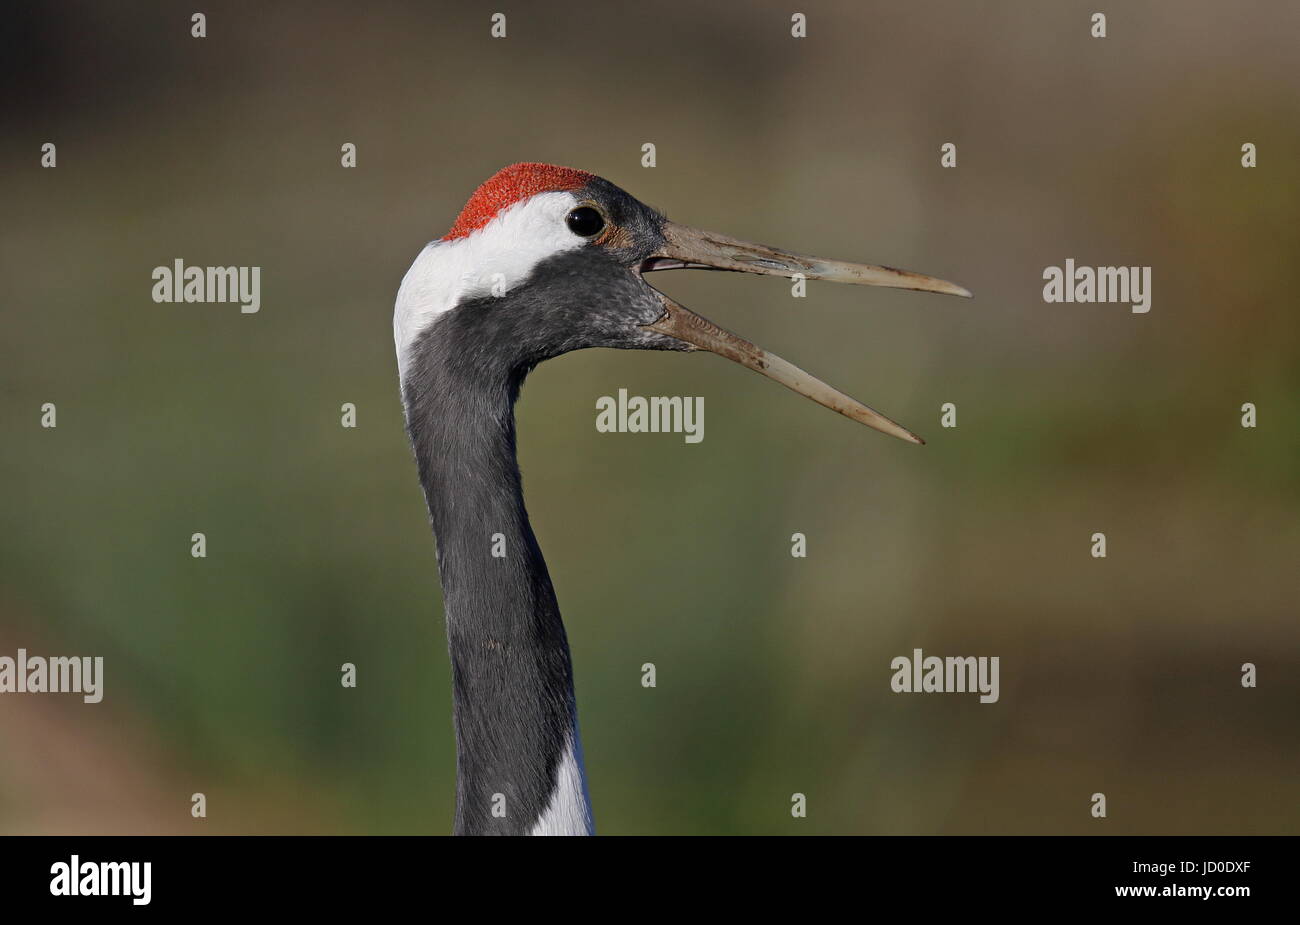 Red crowned Crane portrait Stock Photo